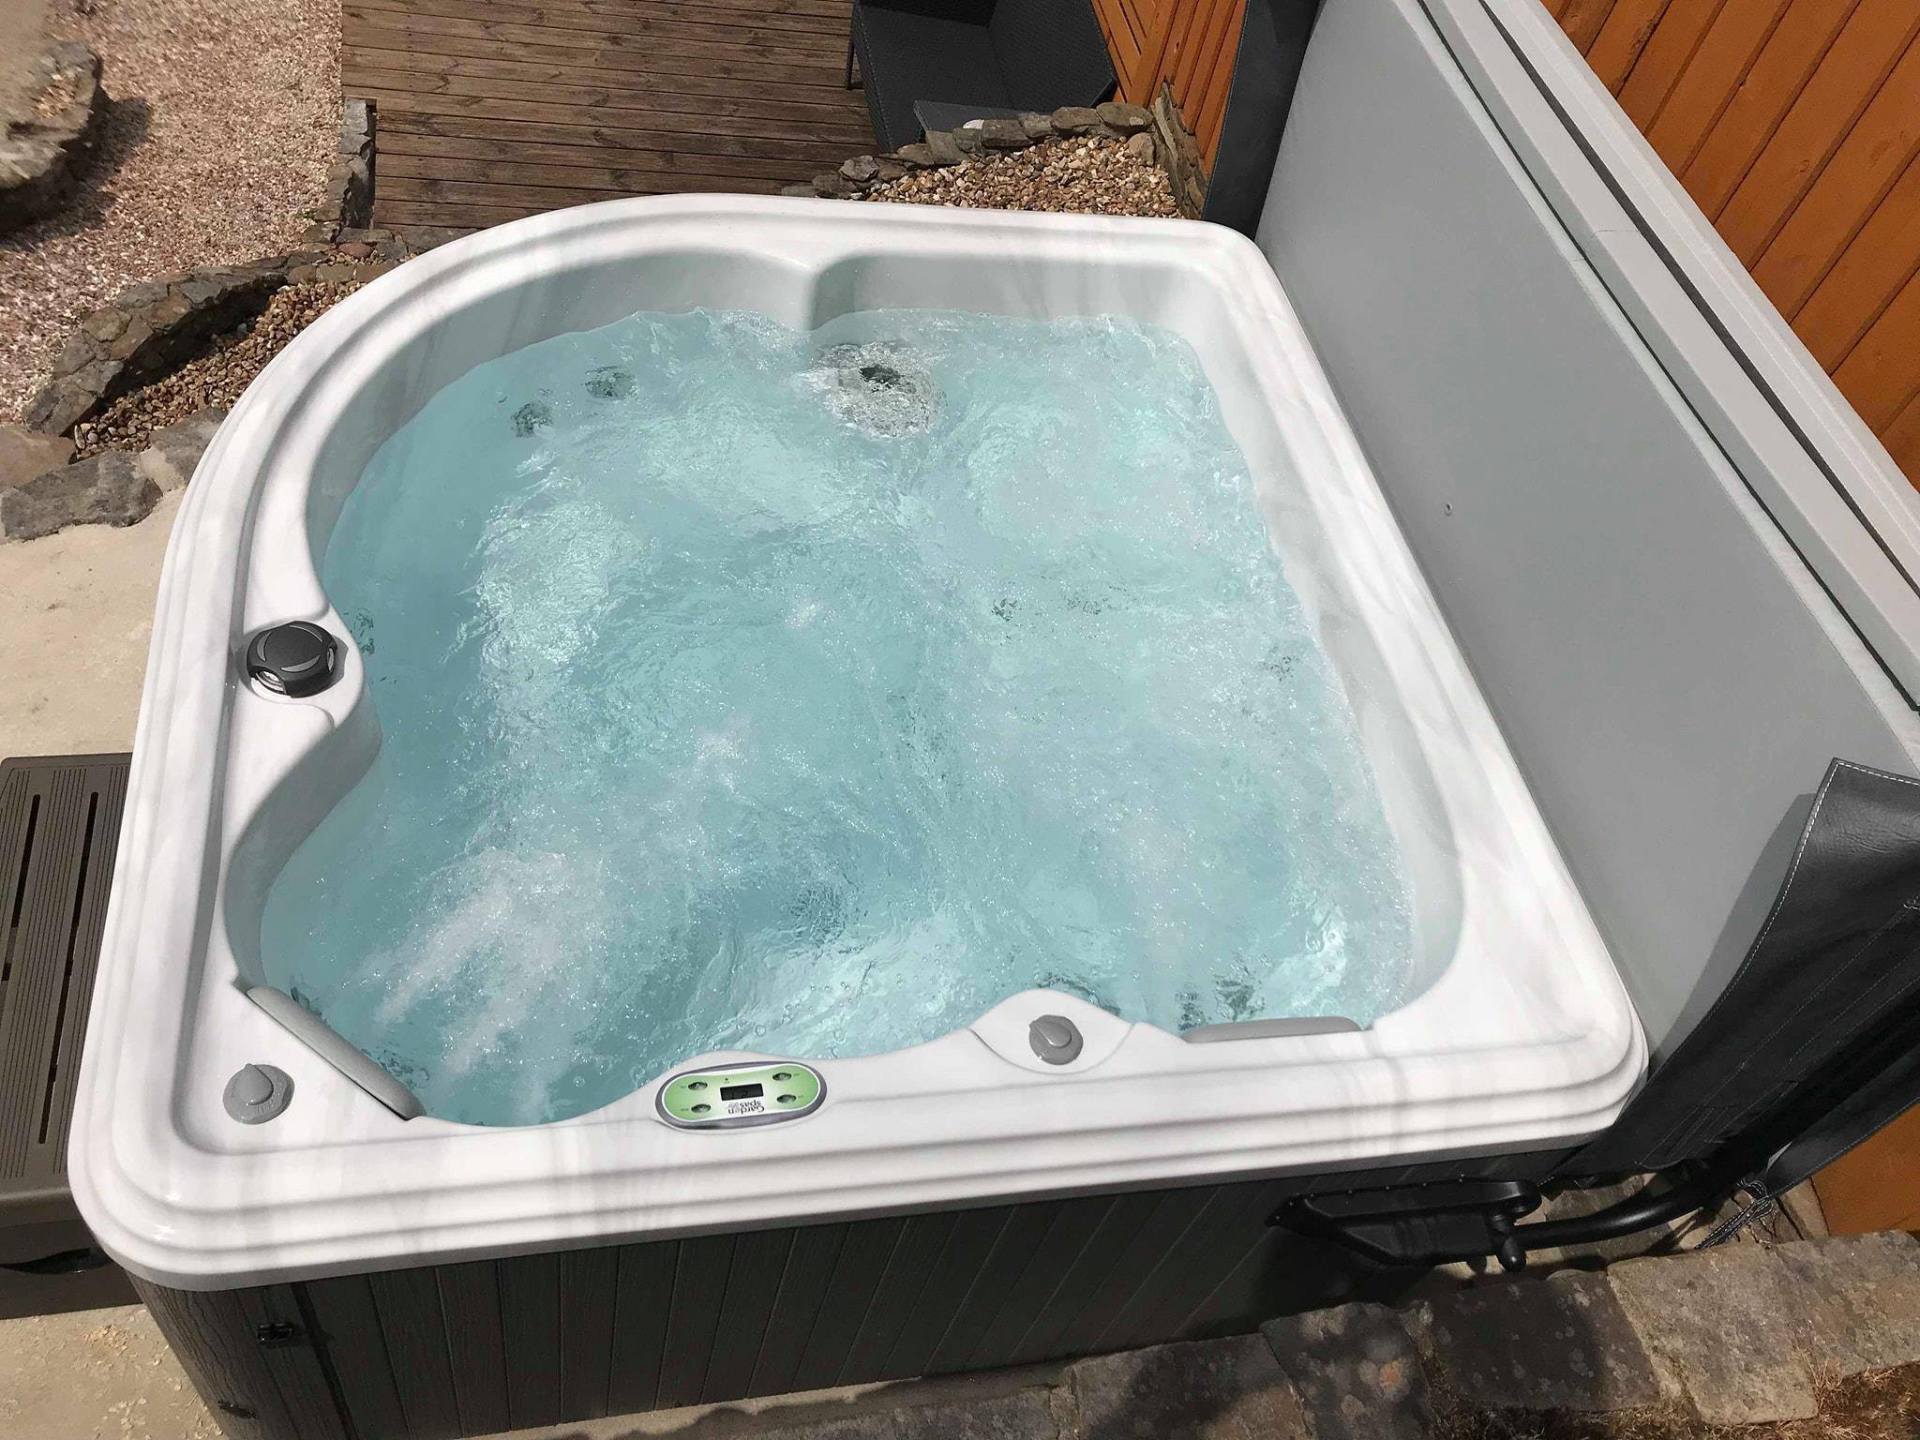 Overhead view of the Artesian Spa Camellia hot tub from Hot tub Haven in surreyii Special Edition